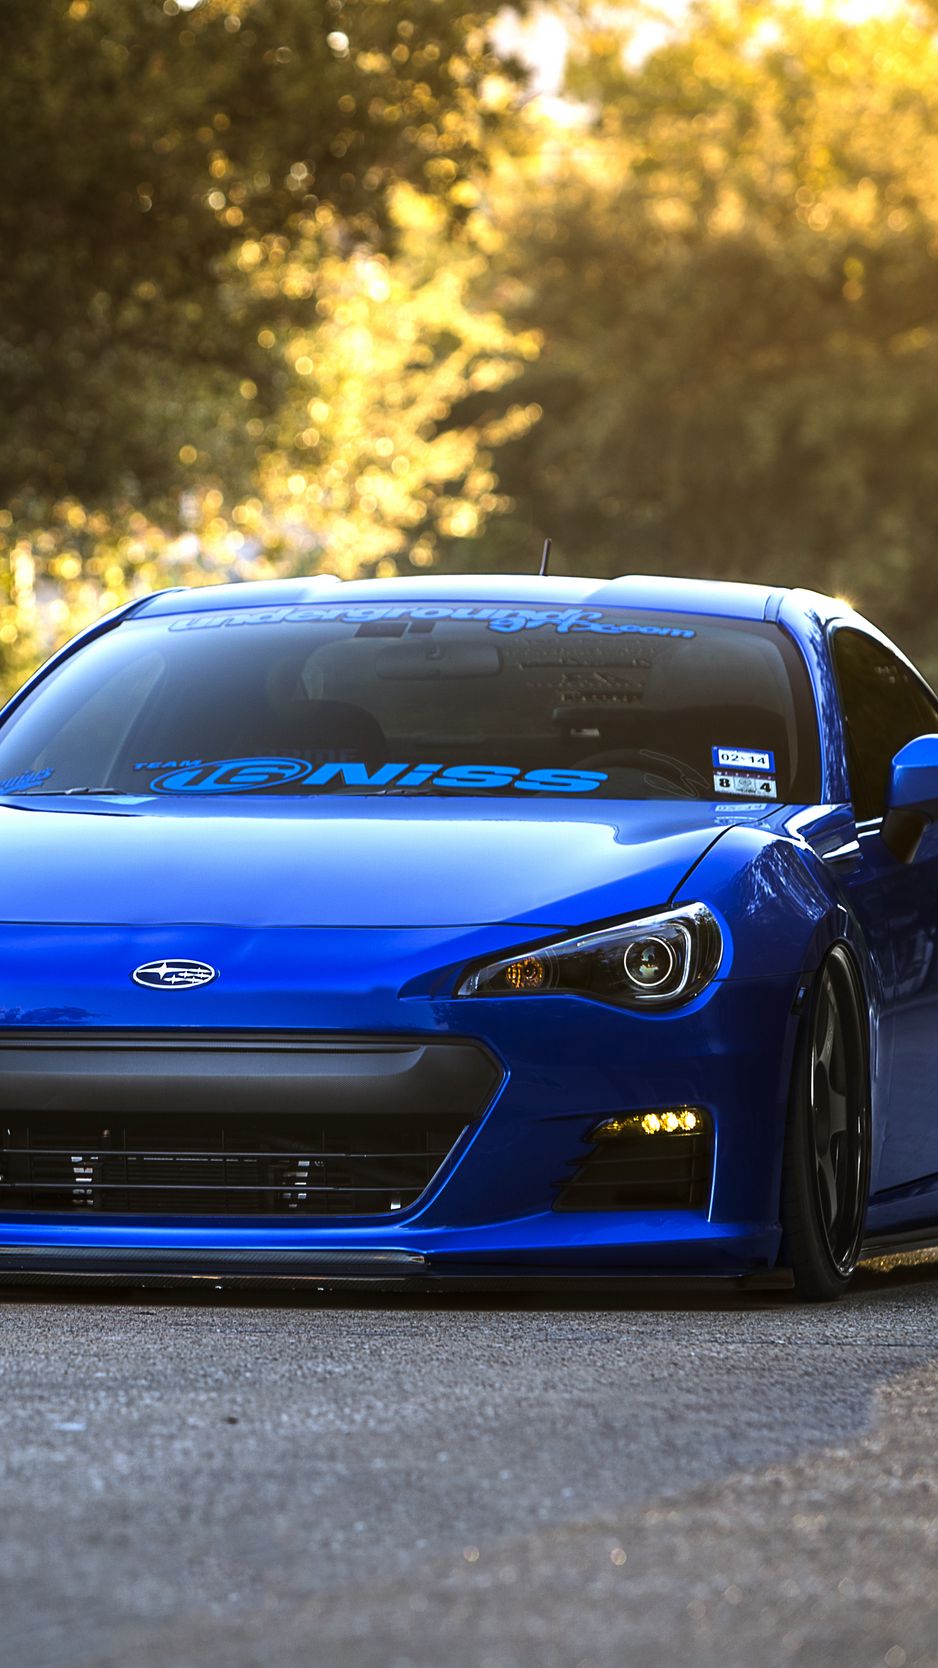 Download Wallpaper 938x1668 Subaru Brz Blue Front Sports Car Coupe Iphone 8 7 6s 6 For Parallax Hd Background